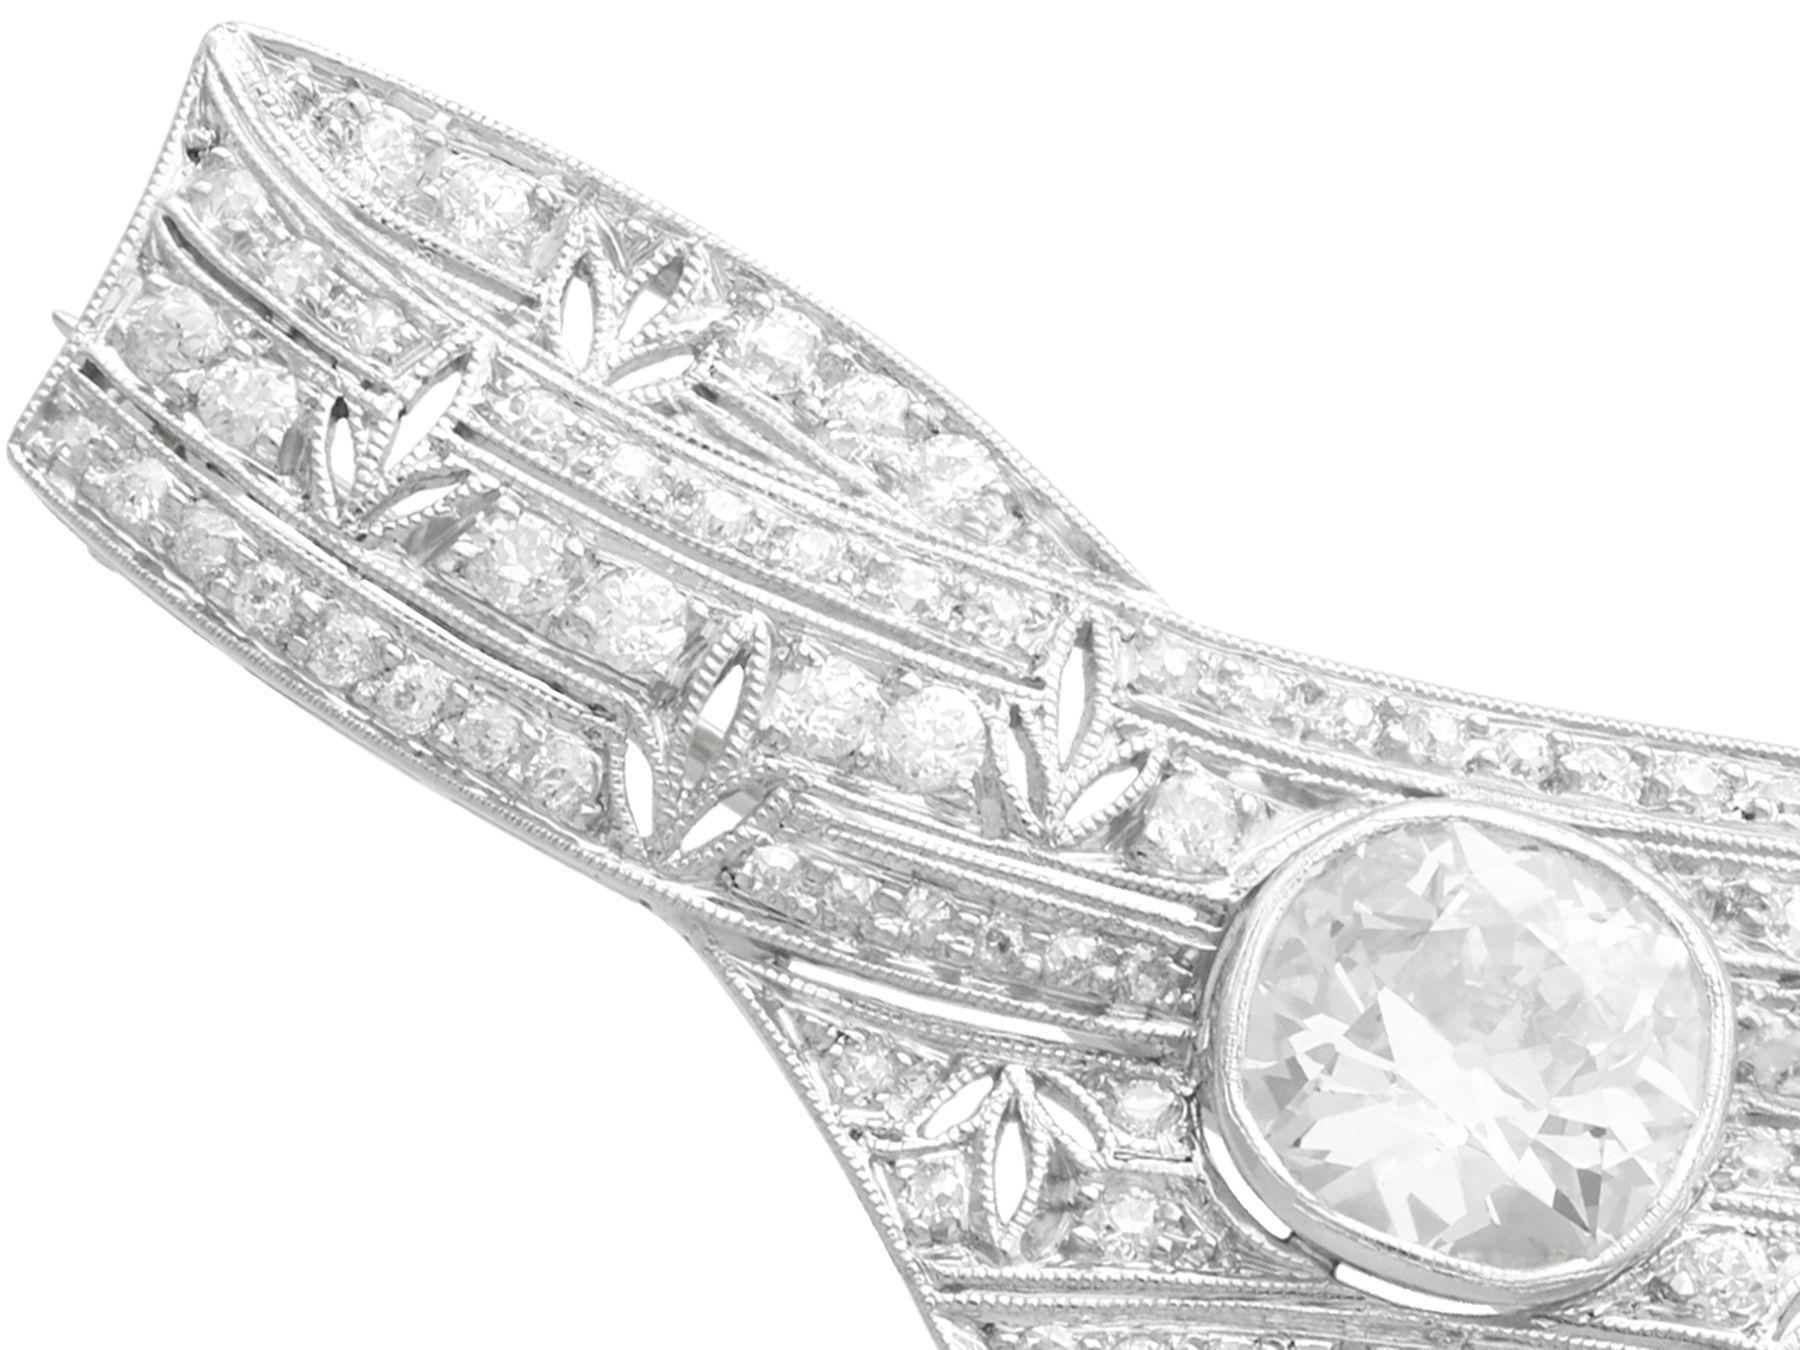 A stunning, fine and impressive antique 3.22 carat diamond and platinum bar brooch; part of our antique jewelry and estate jewelry collections

This stunning, fine and impressive 1920s diamond brooch has been crafted in platinum.

The